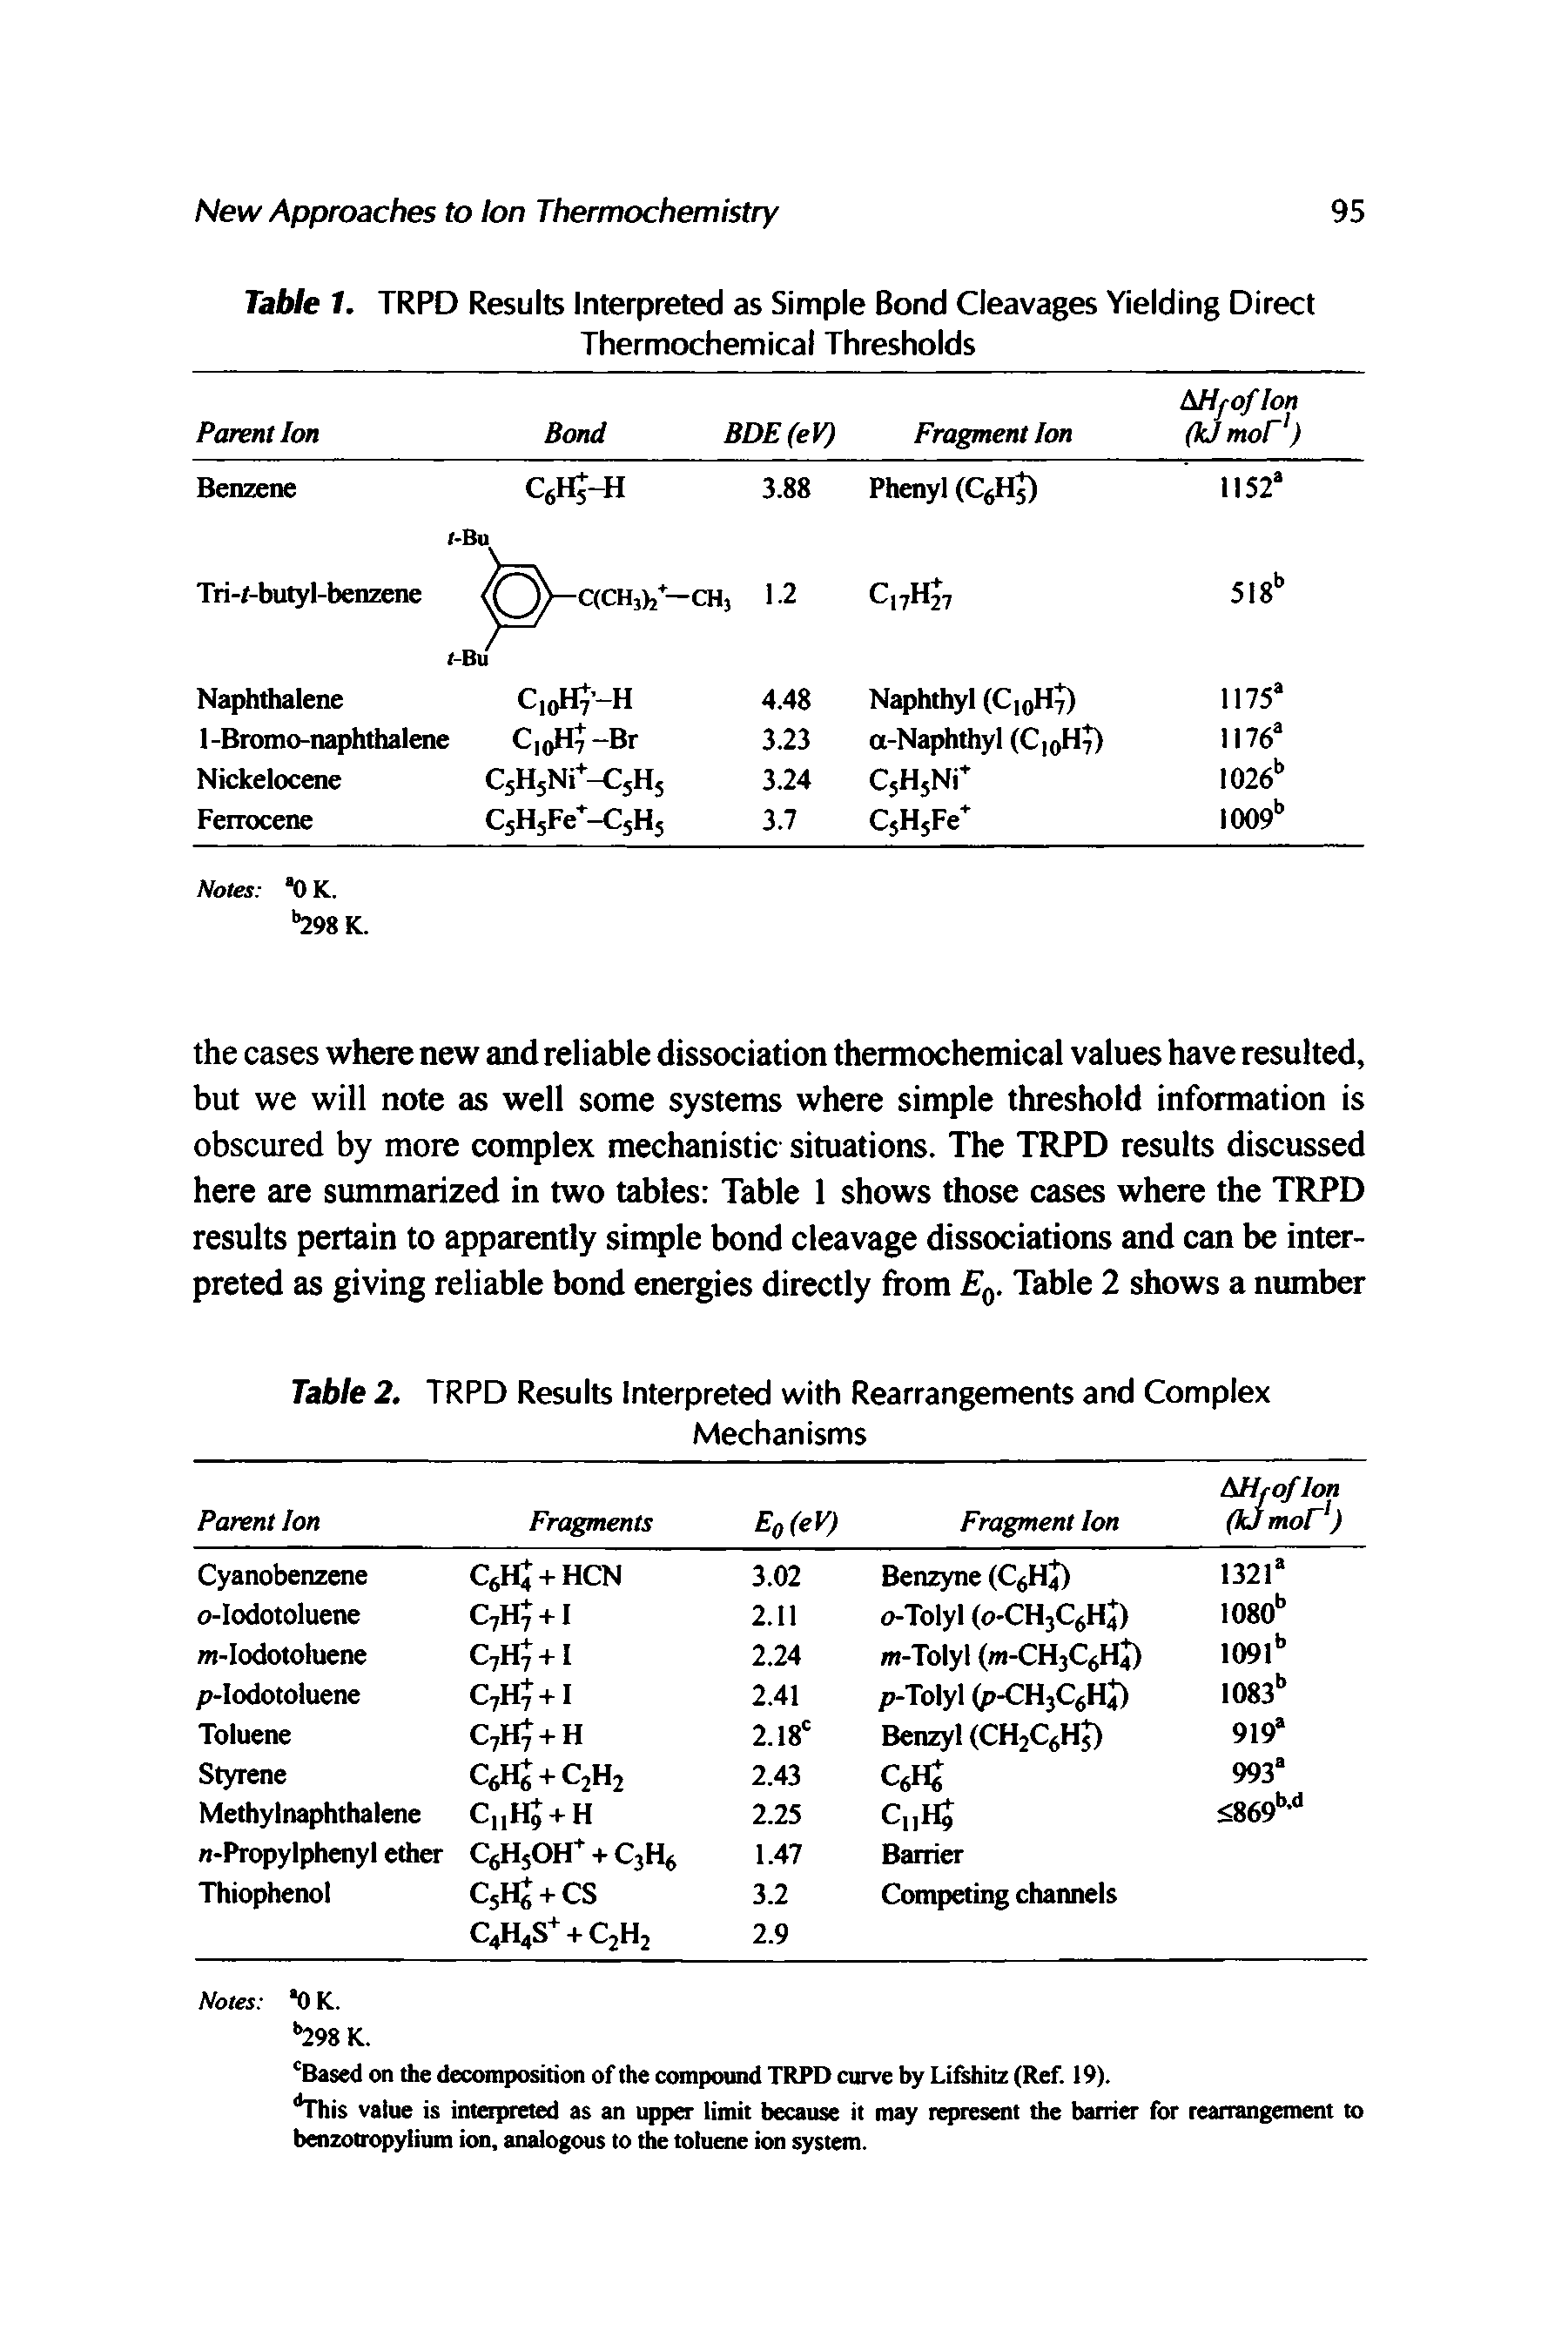 Table 1. TRPD Results Interpreted as Simple Bond Cleavages Yielding Direct Thermochemical Thresholds...